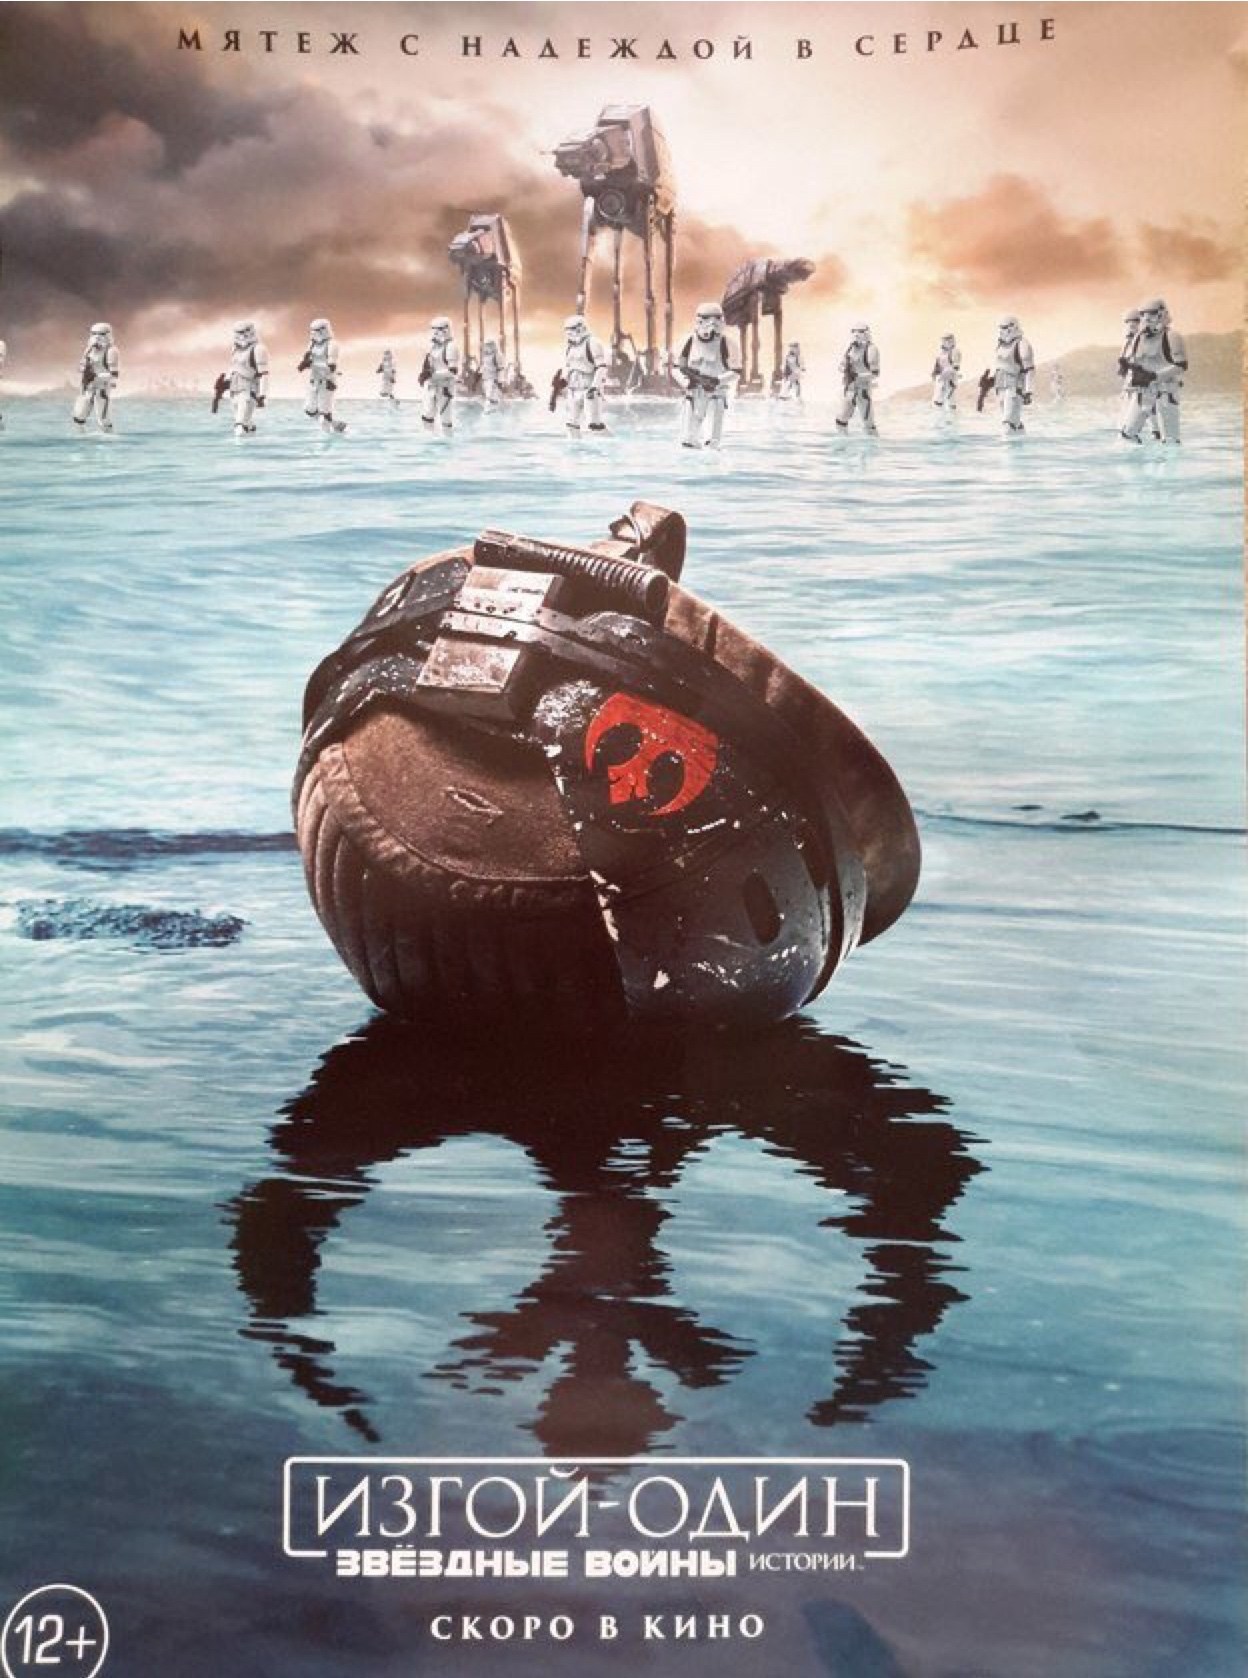 This Russian Rogue One Poster Puts The War In Star Wars